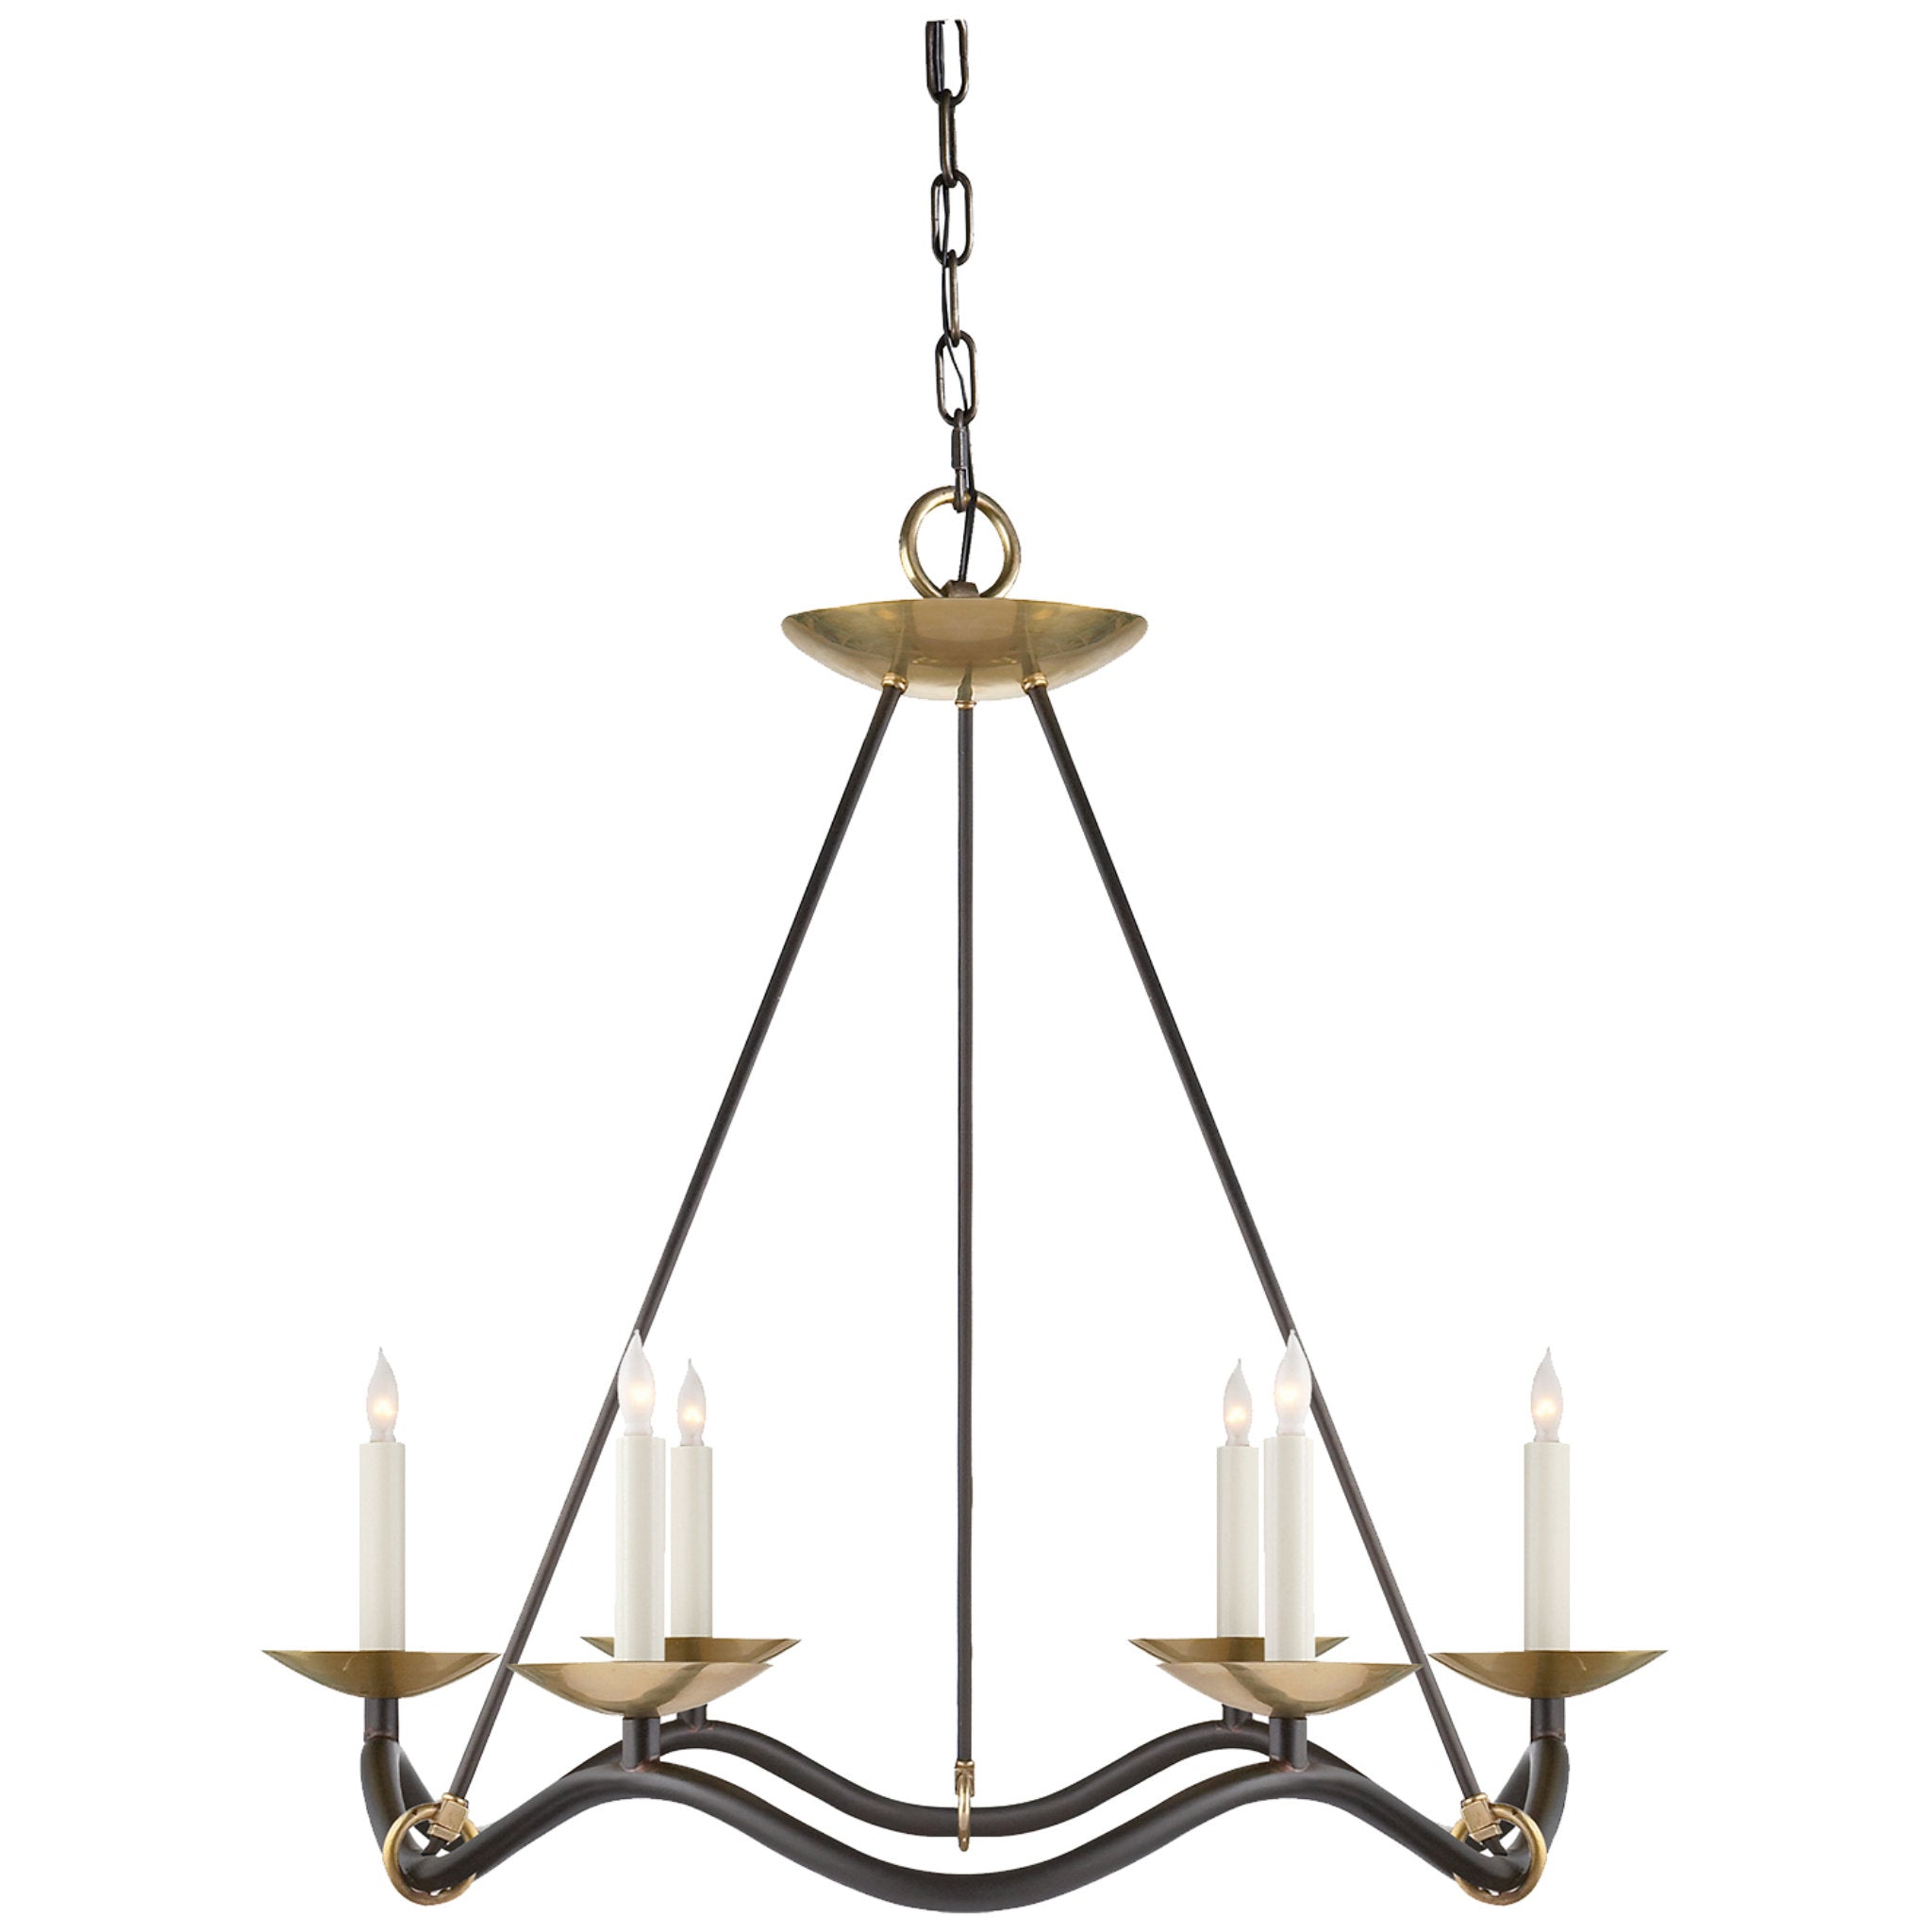 Barry Goralnick Choros Chandelier in Aged Iron with Hand-Rubbed Antique Brass Accents